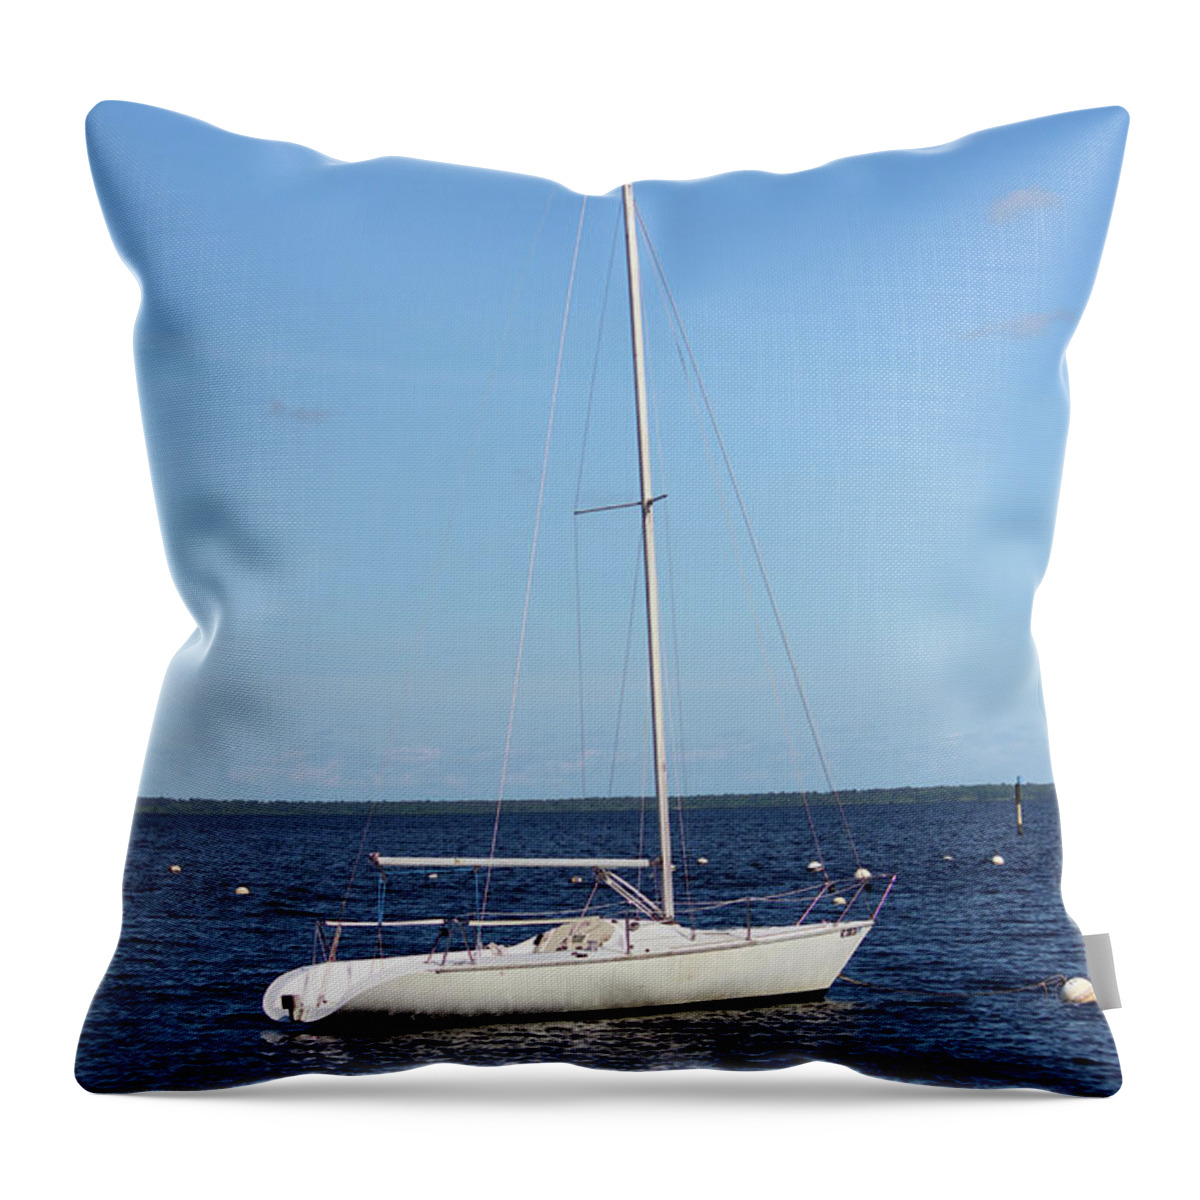 Boat Throw Pillow featuring the photograph White And Blue by Cynthia Guinn